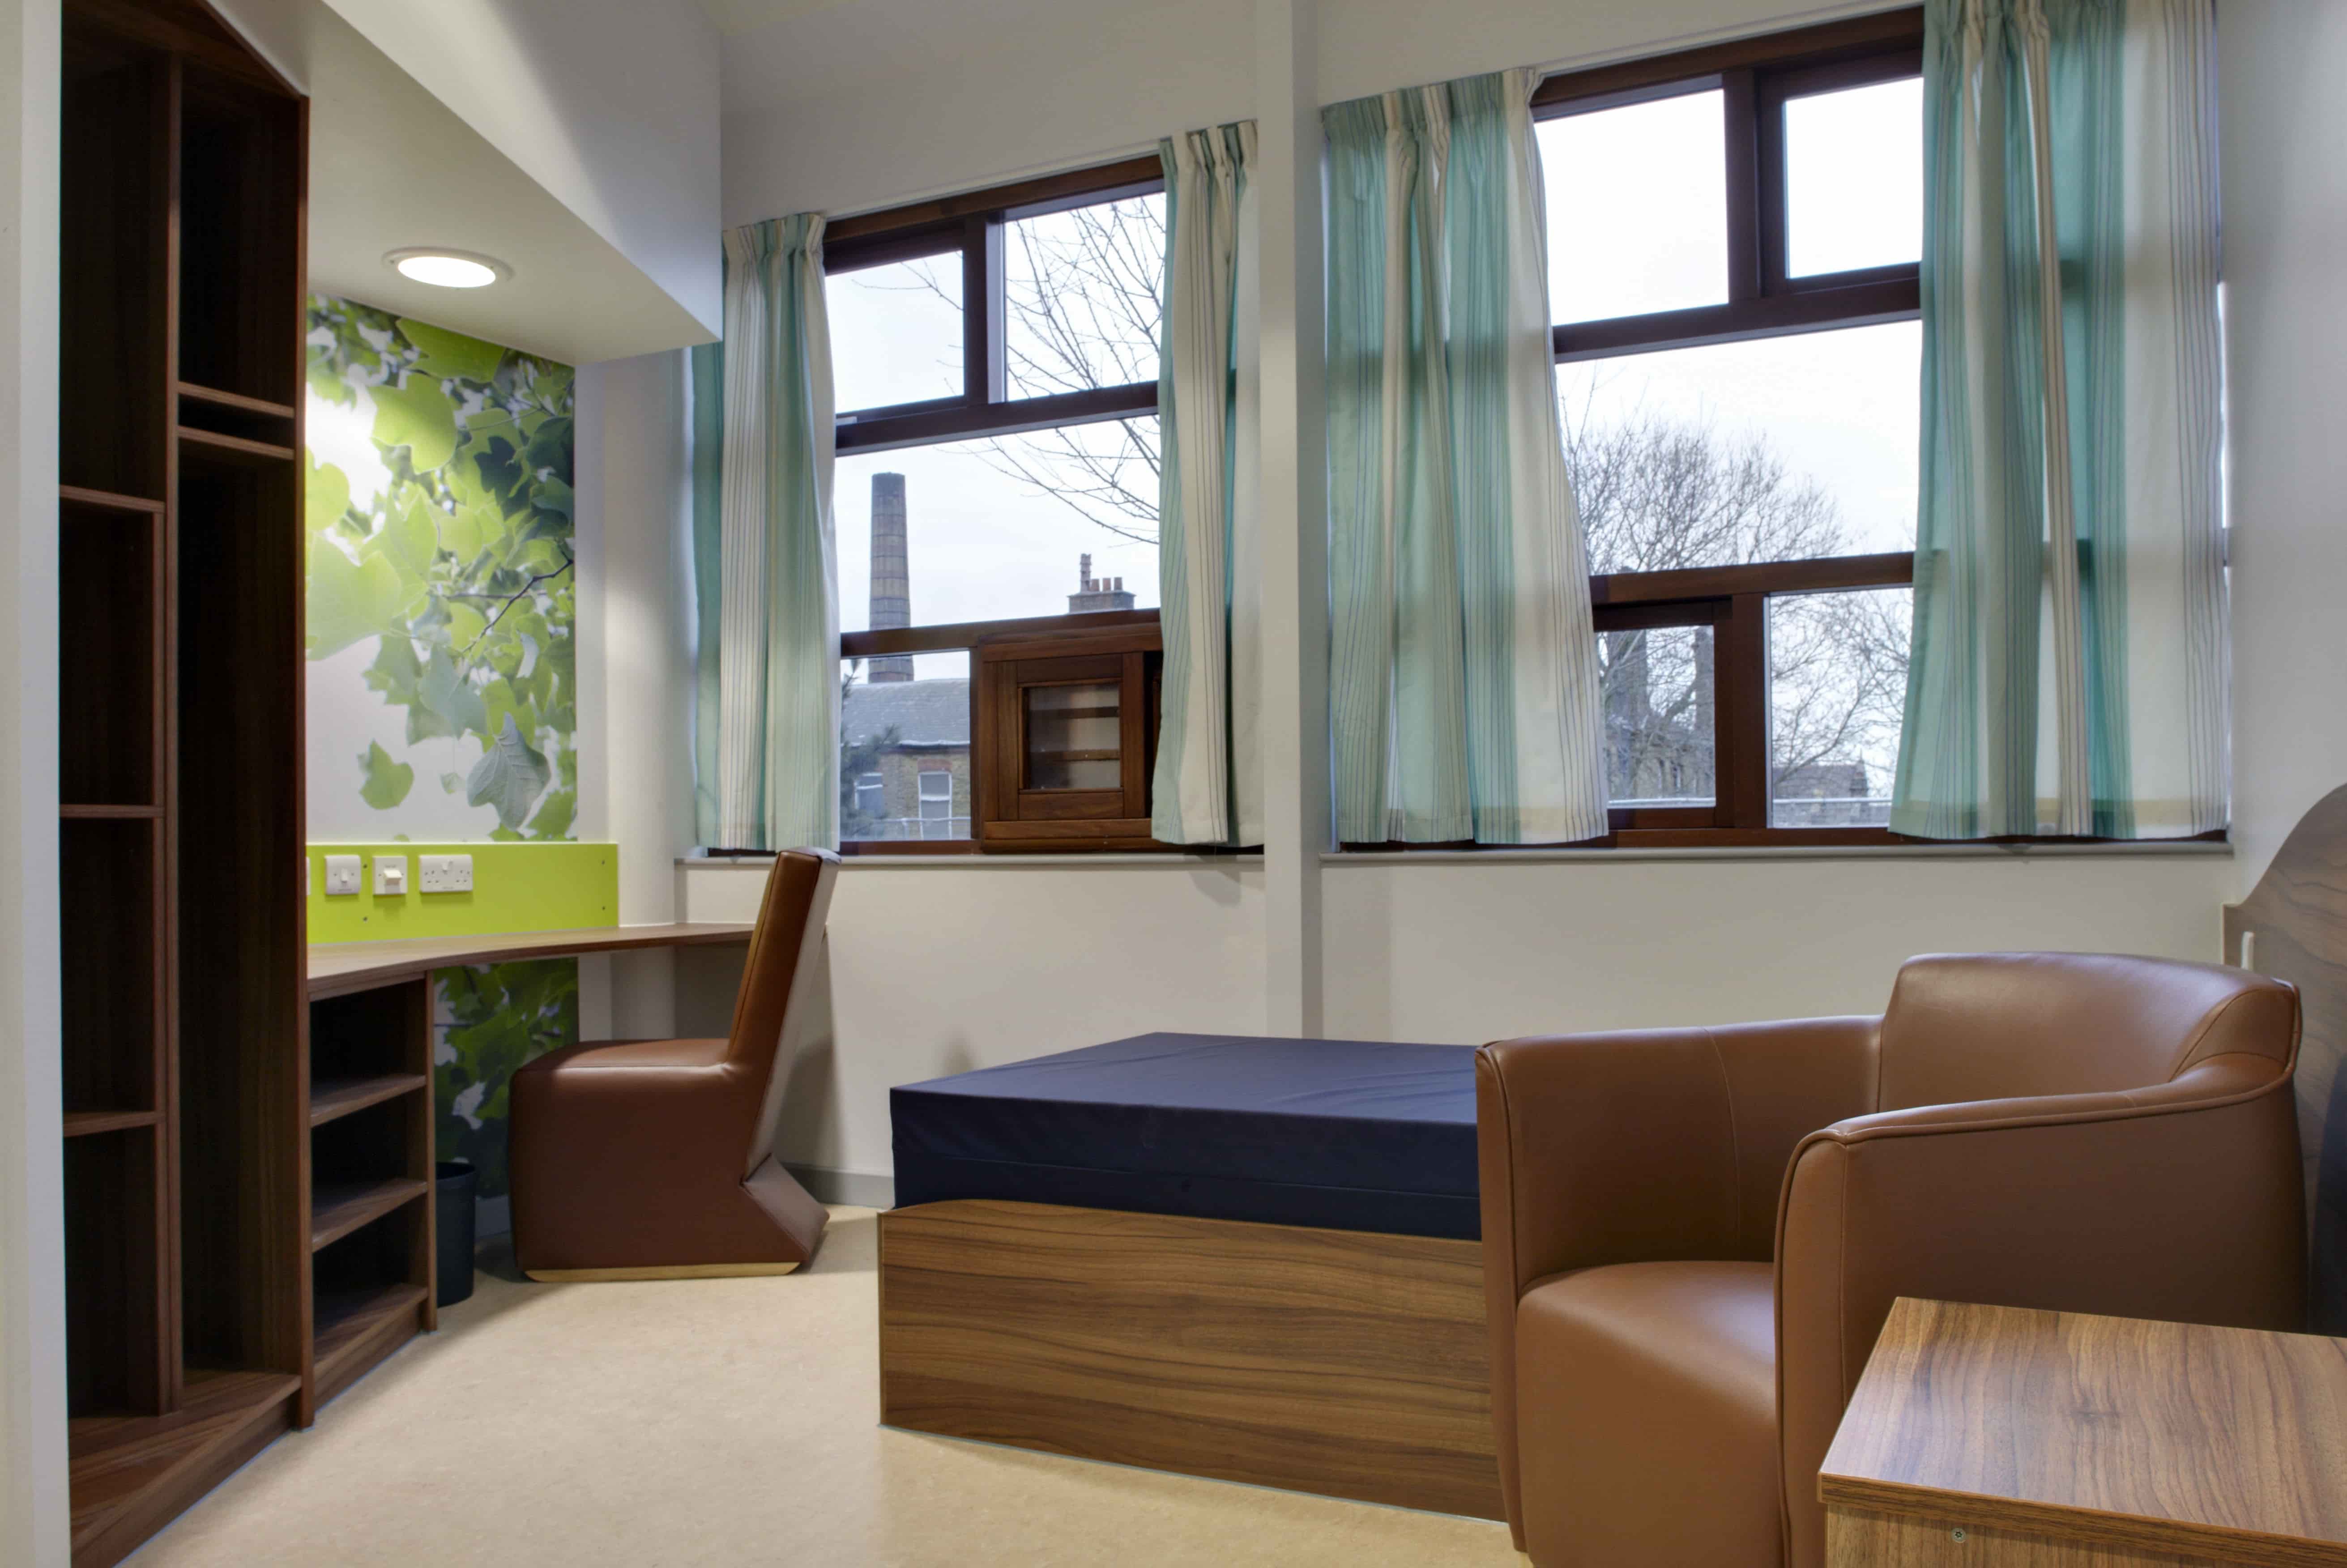 Interior Design Approaches Mental Health Bedrooms Springfield University Hospital 2010 Oliver Edwards 0 